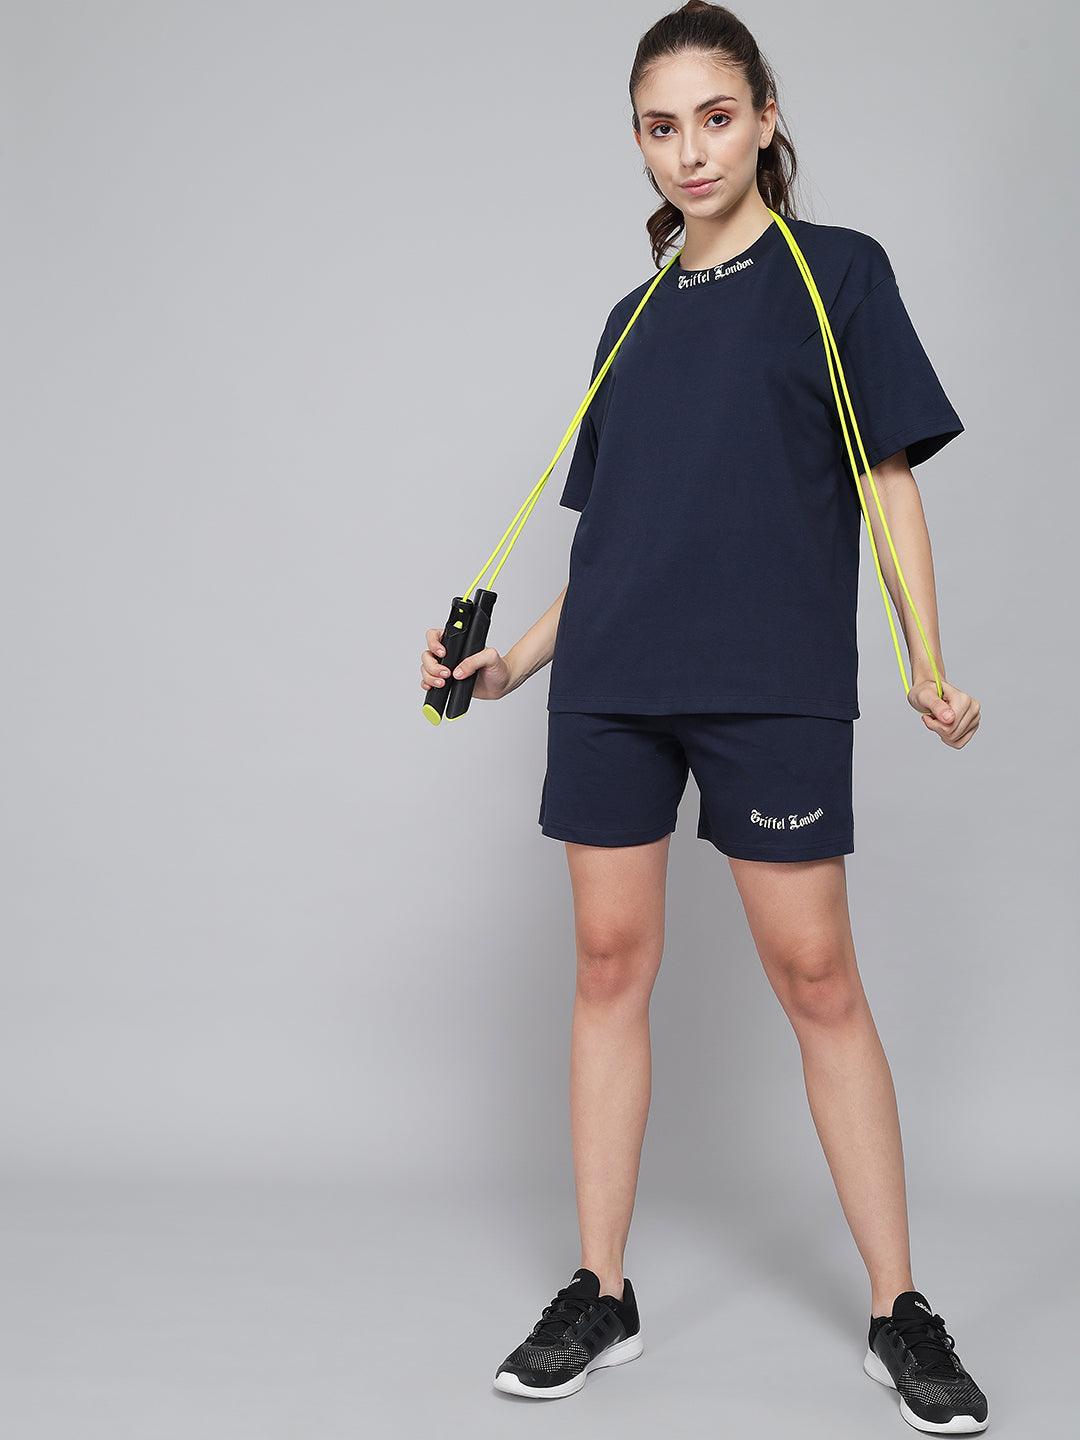 GRIFFEL Women Basic Solid Oversized Loose fit Navy T-shirt and Short Set - griffel